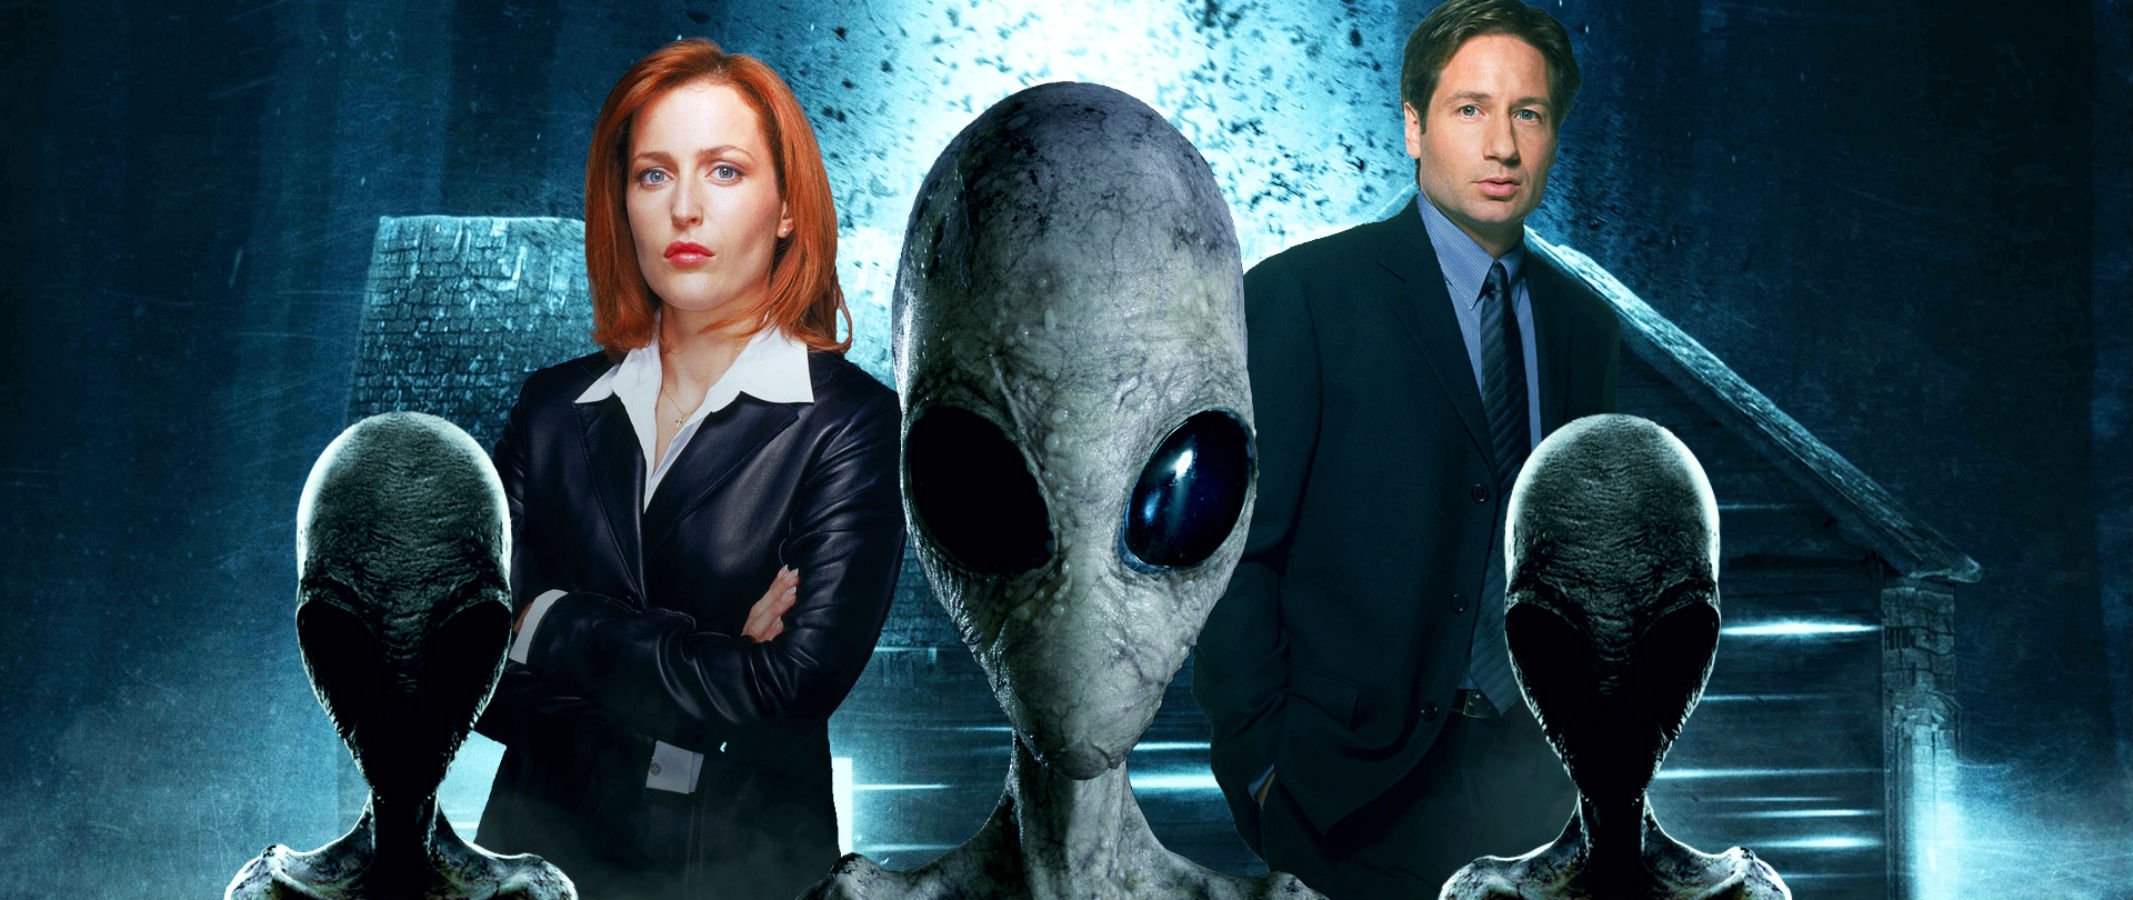 x files home online free